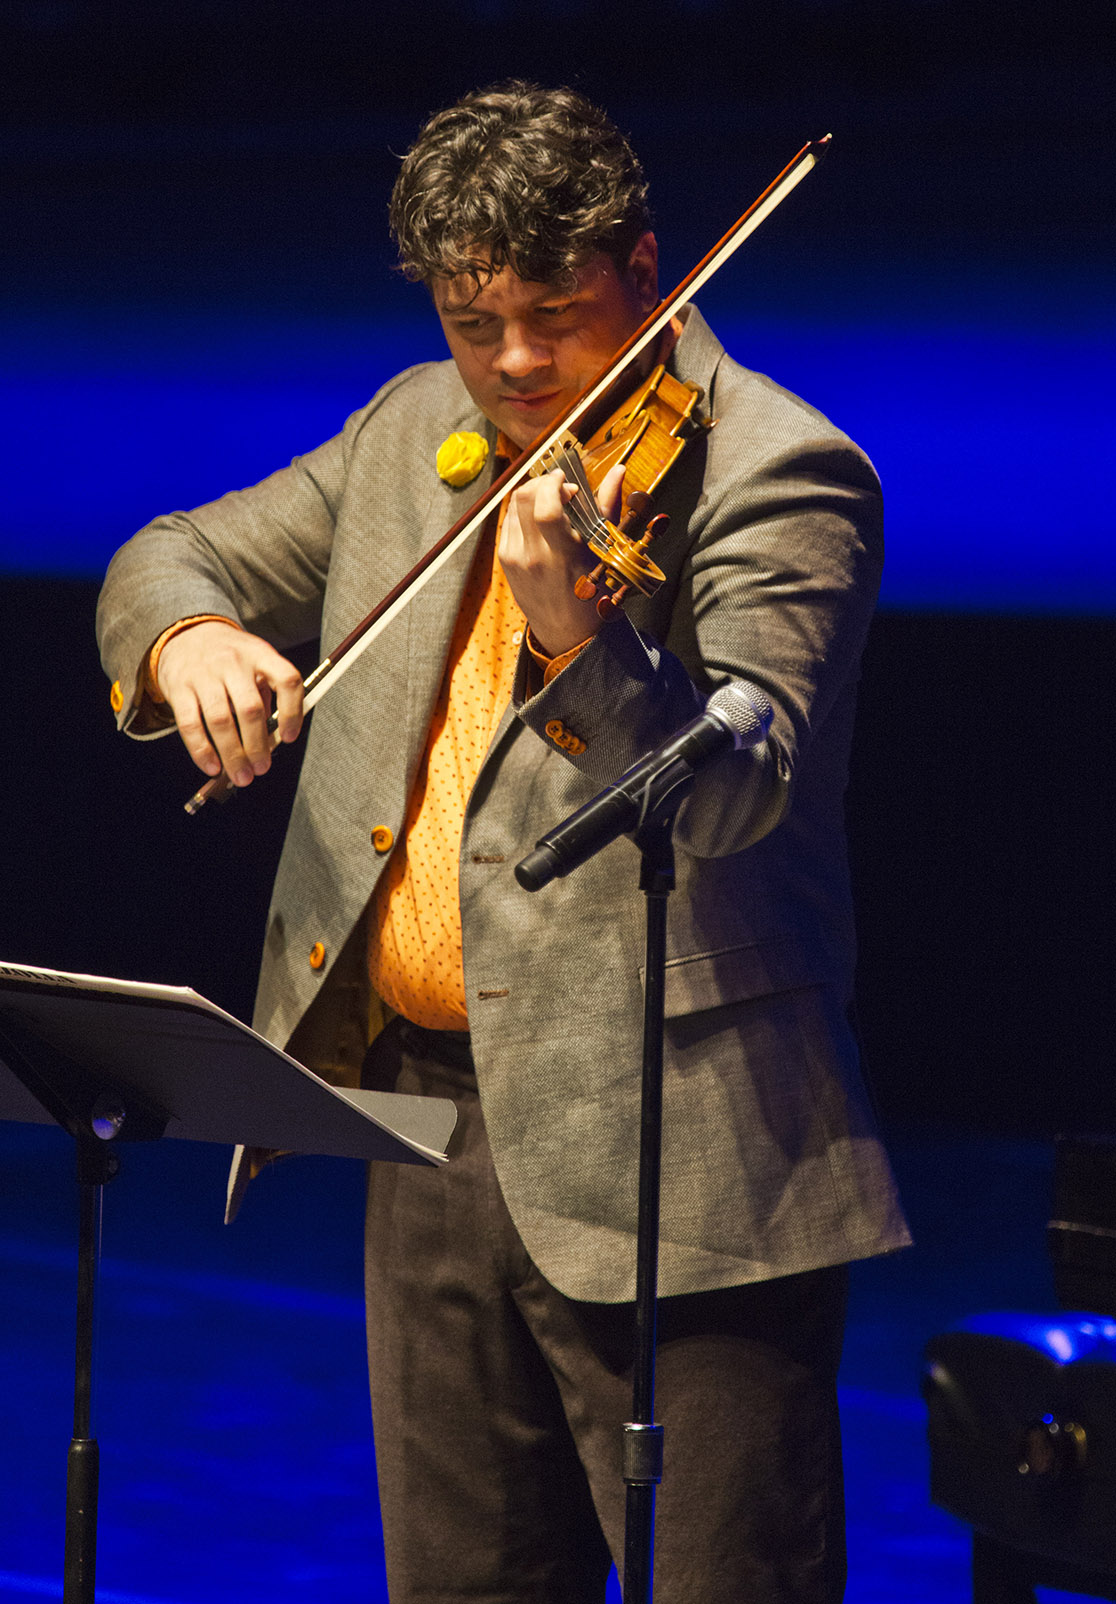 Violinist playing on stage